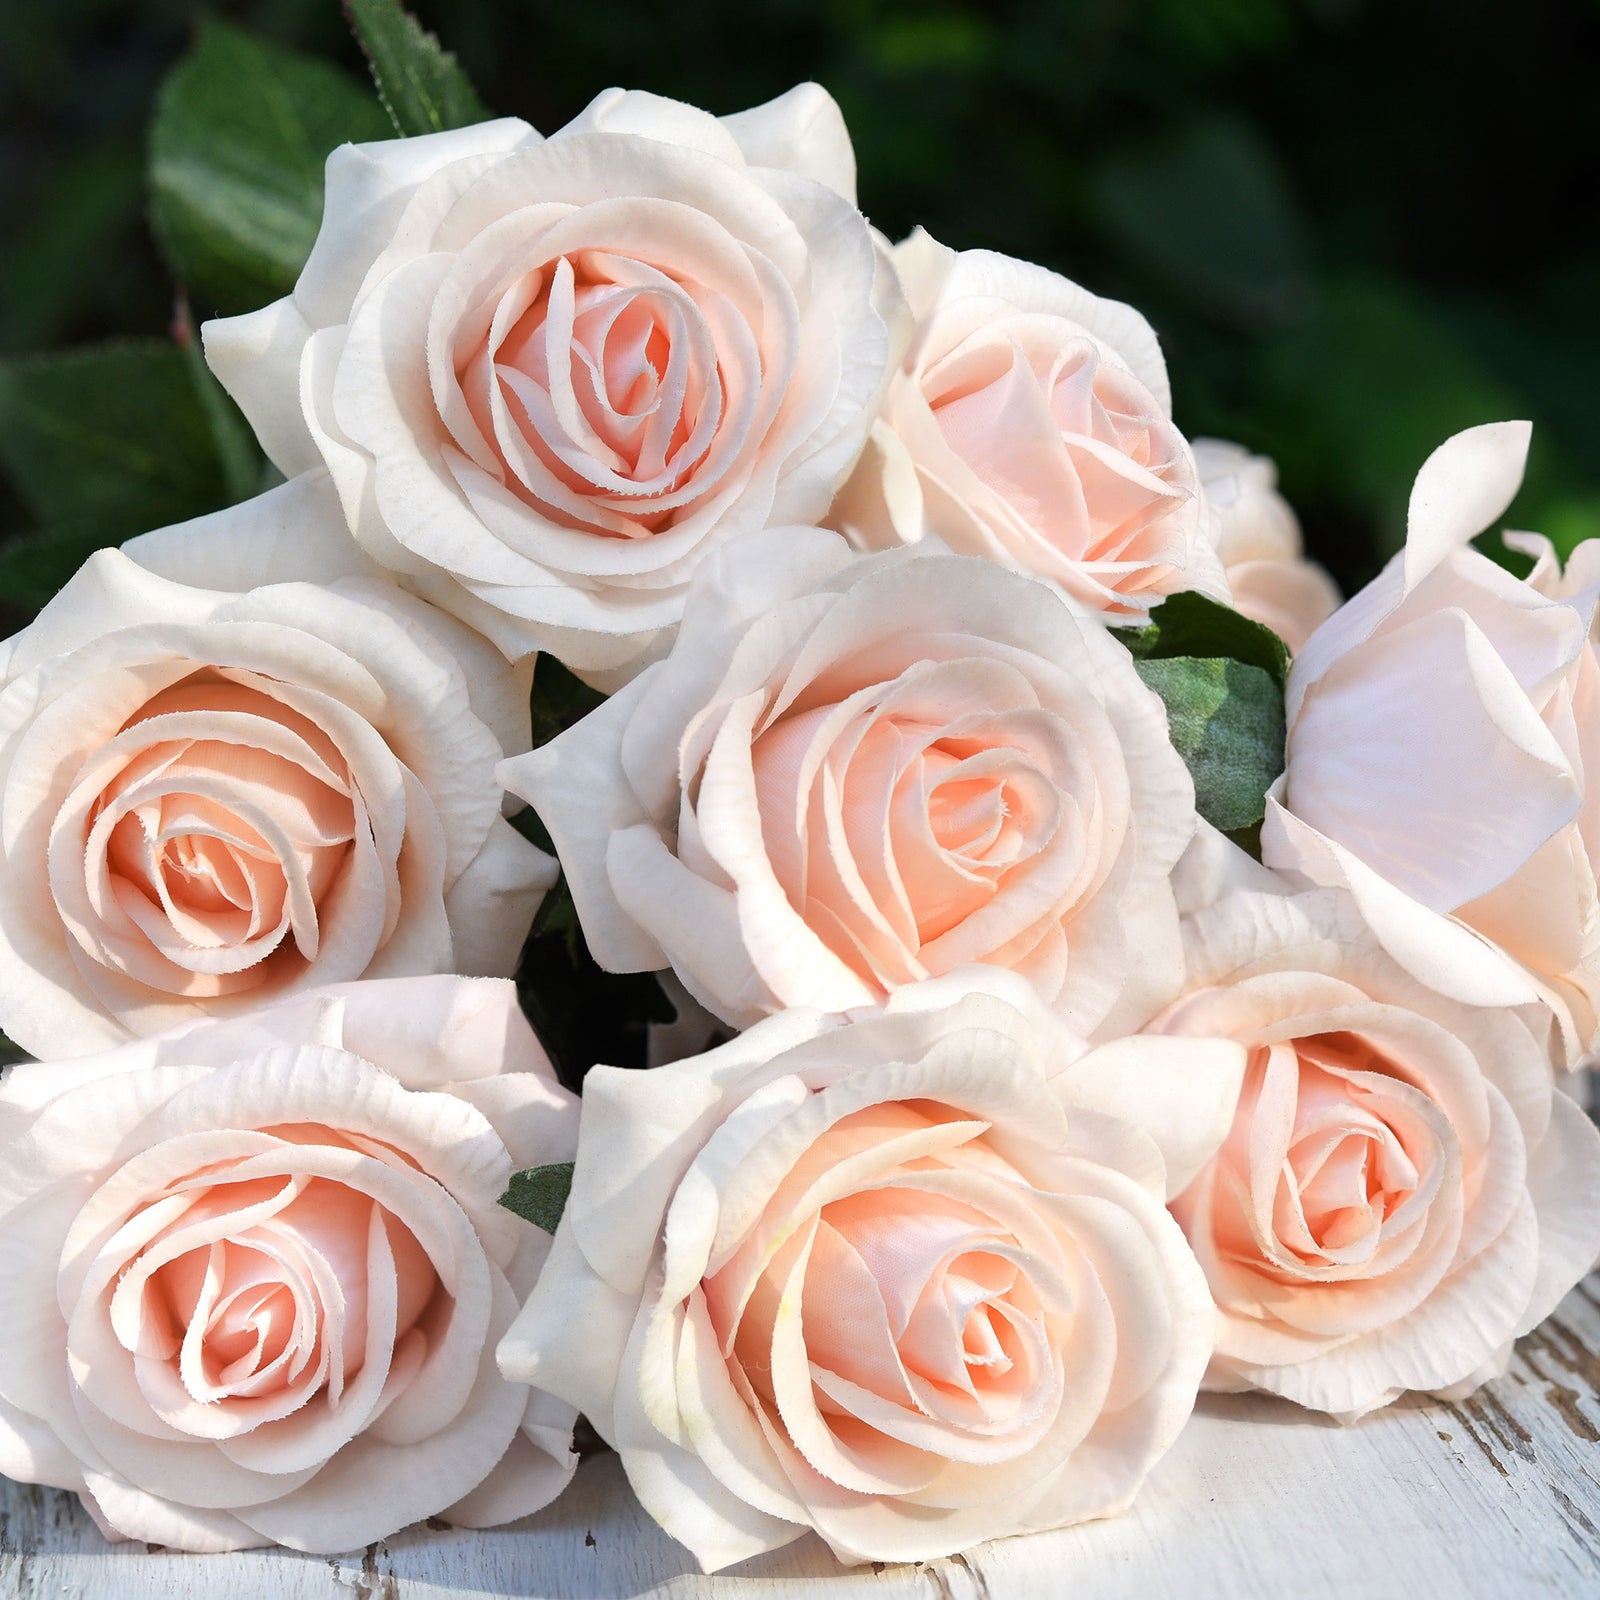 Real Touch 10 Stems Pale Champagne Pink Silk Artificial Roses Flowers ‘Petals Feel and Look like Fresh Roses